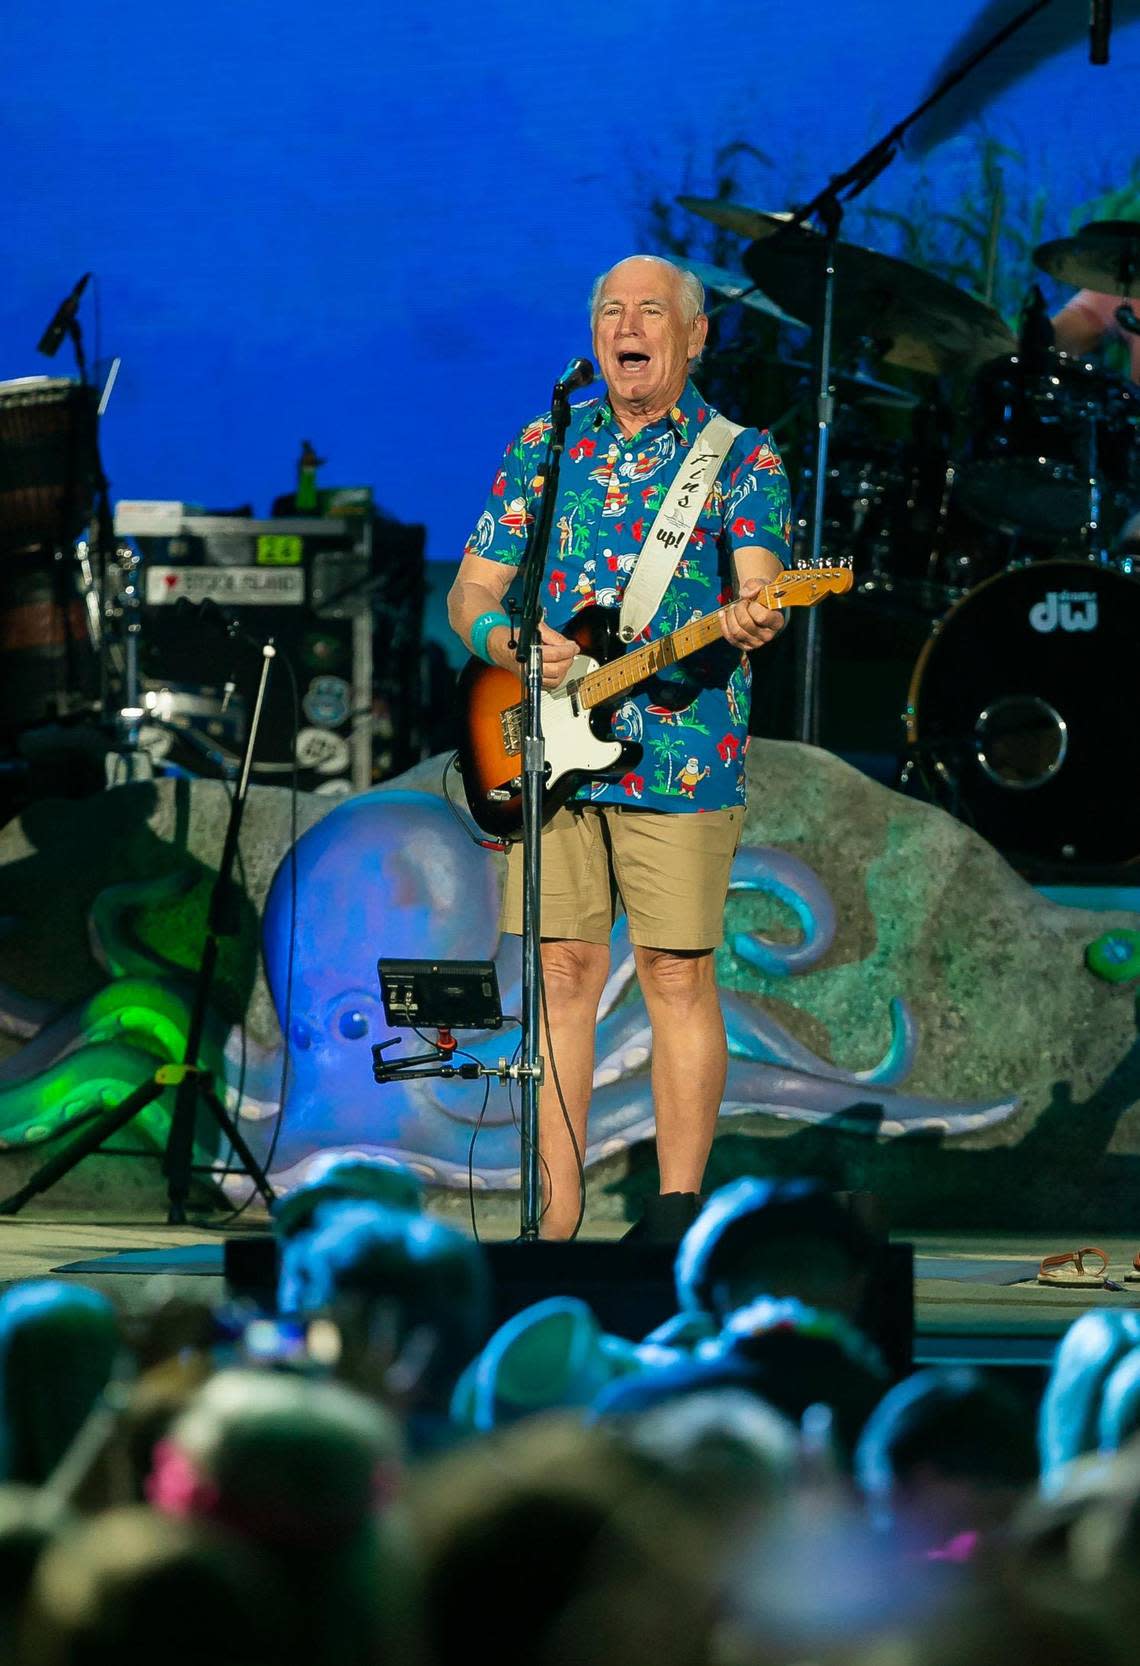 Jimmy Buffett dies at 76. Singer turned Key West lifestyle into a